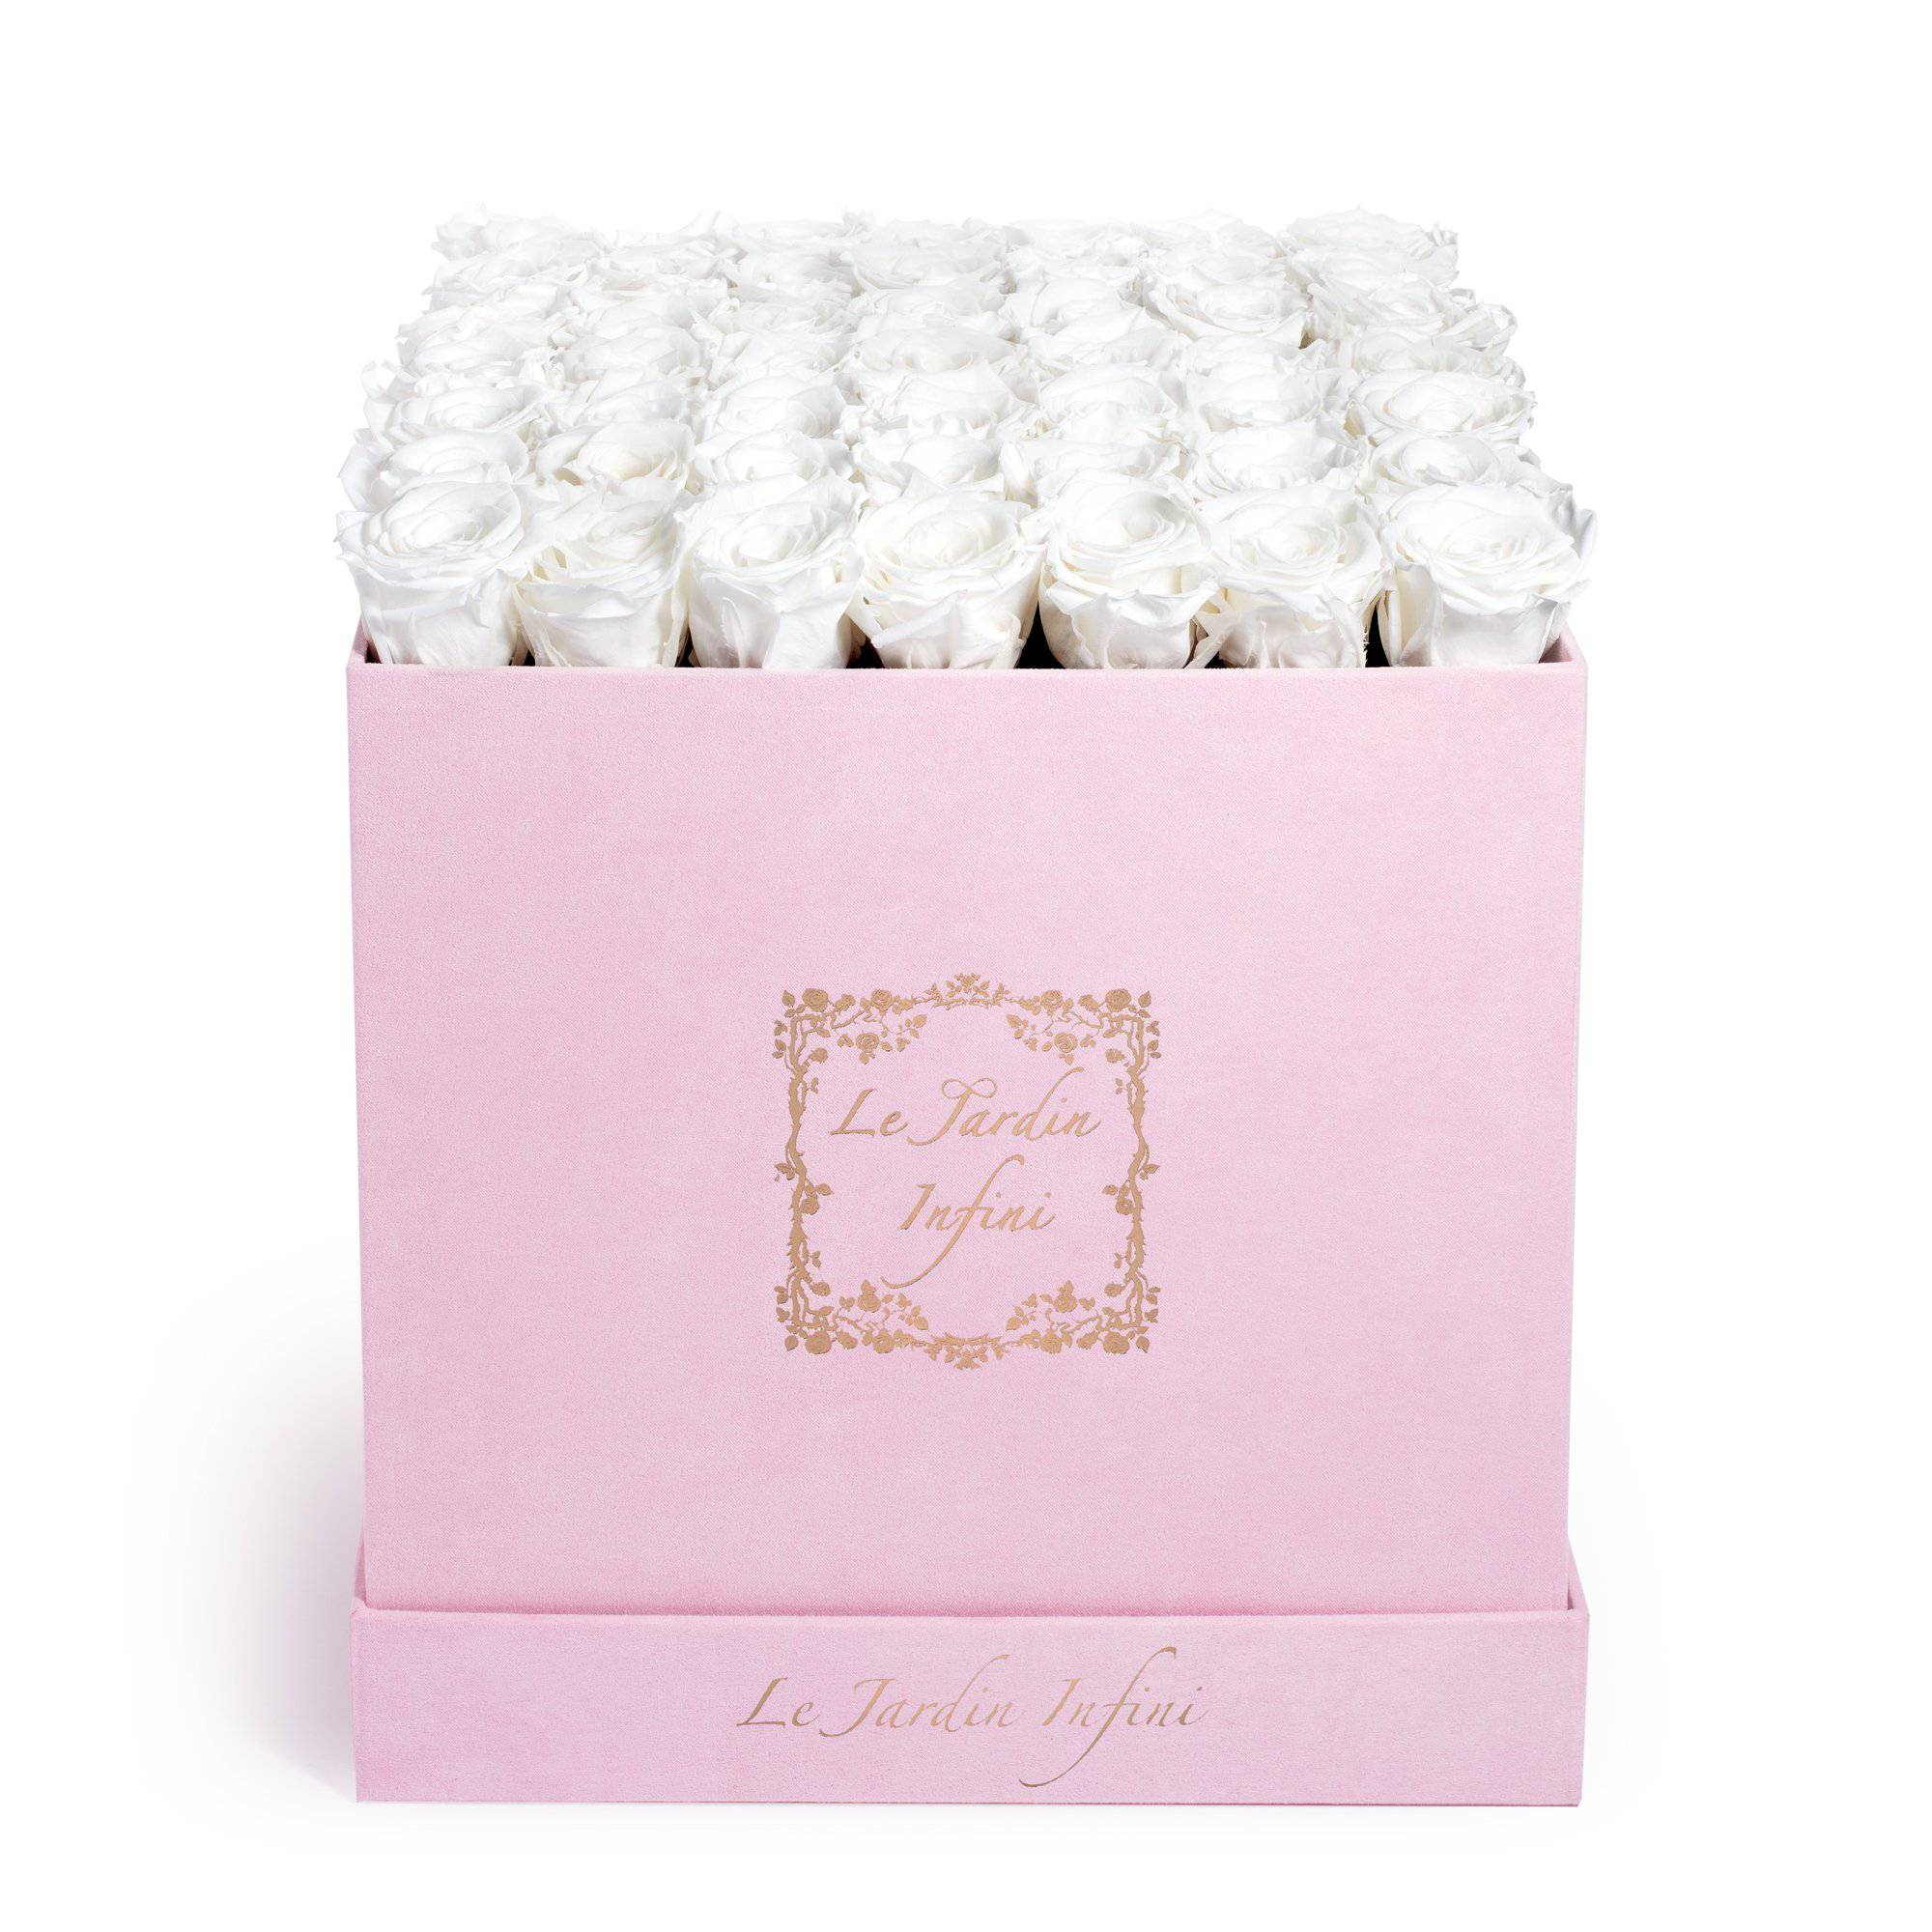 White Preserved Roses  - Large Square Luxury Pink Suede Box - Le Jardin Infini Roses in a Box